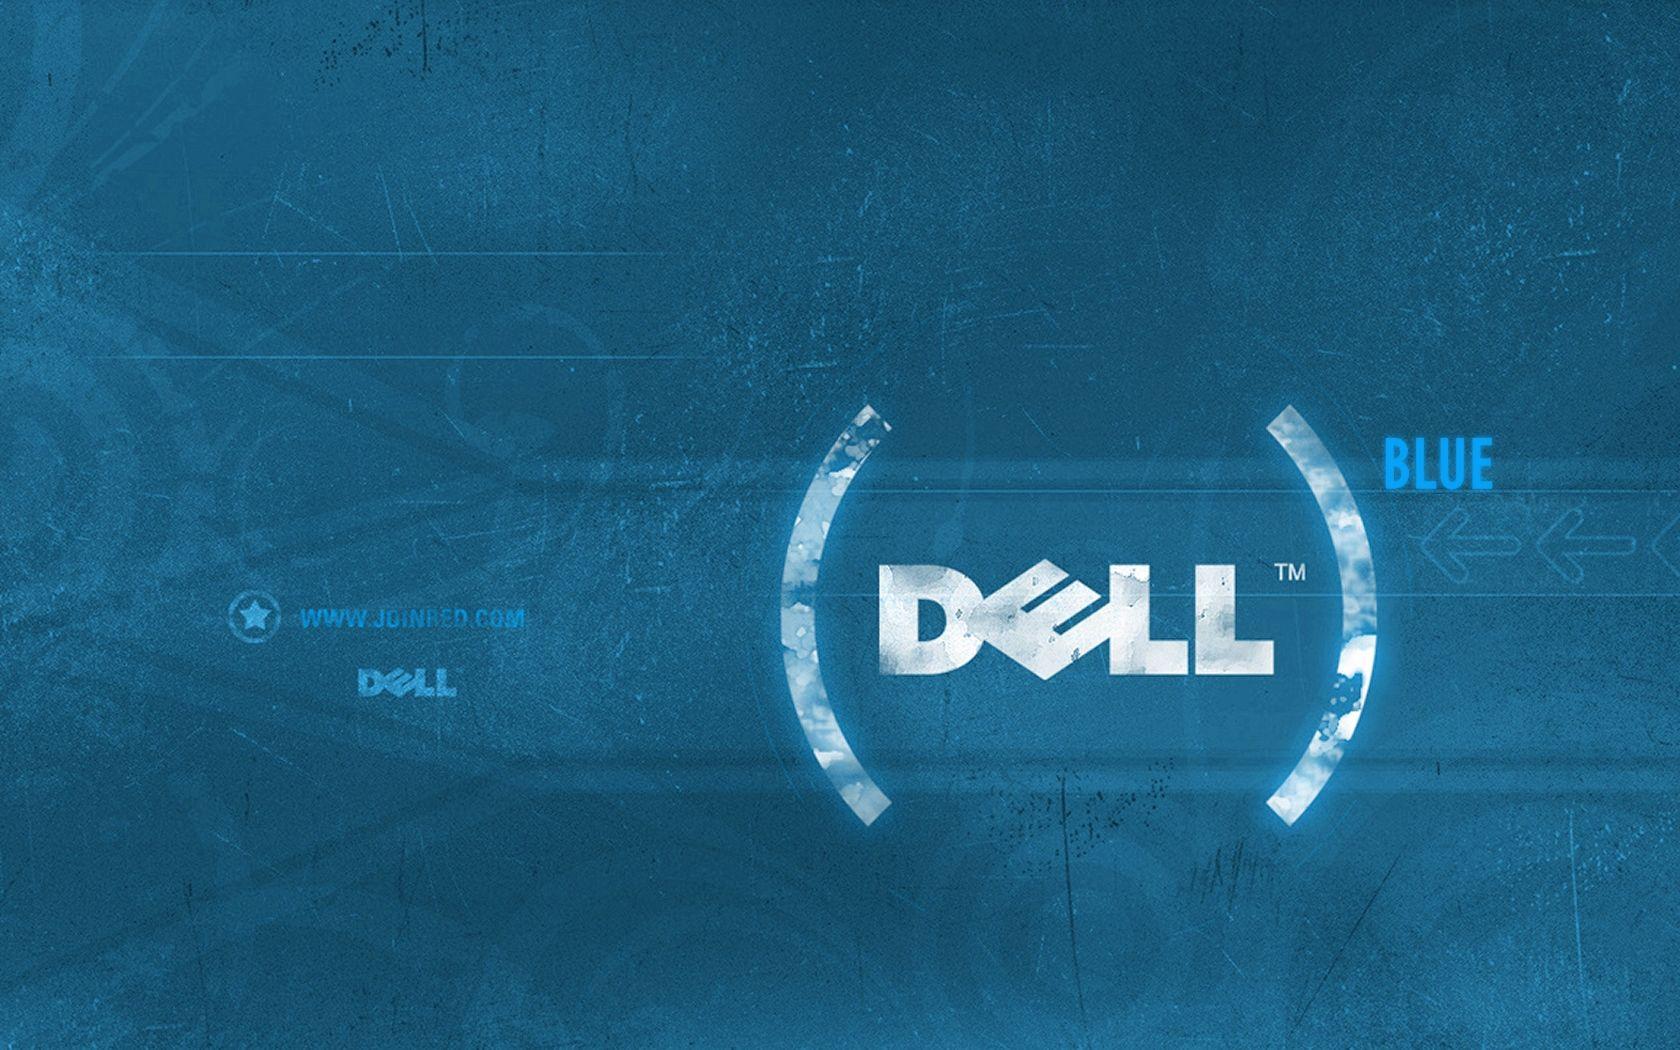 Dell Inspiron Wallpapers - Wallpaper Cave